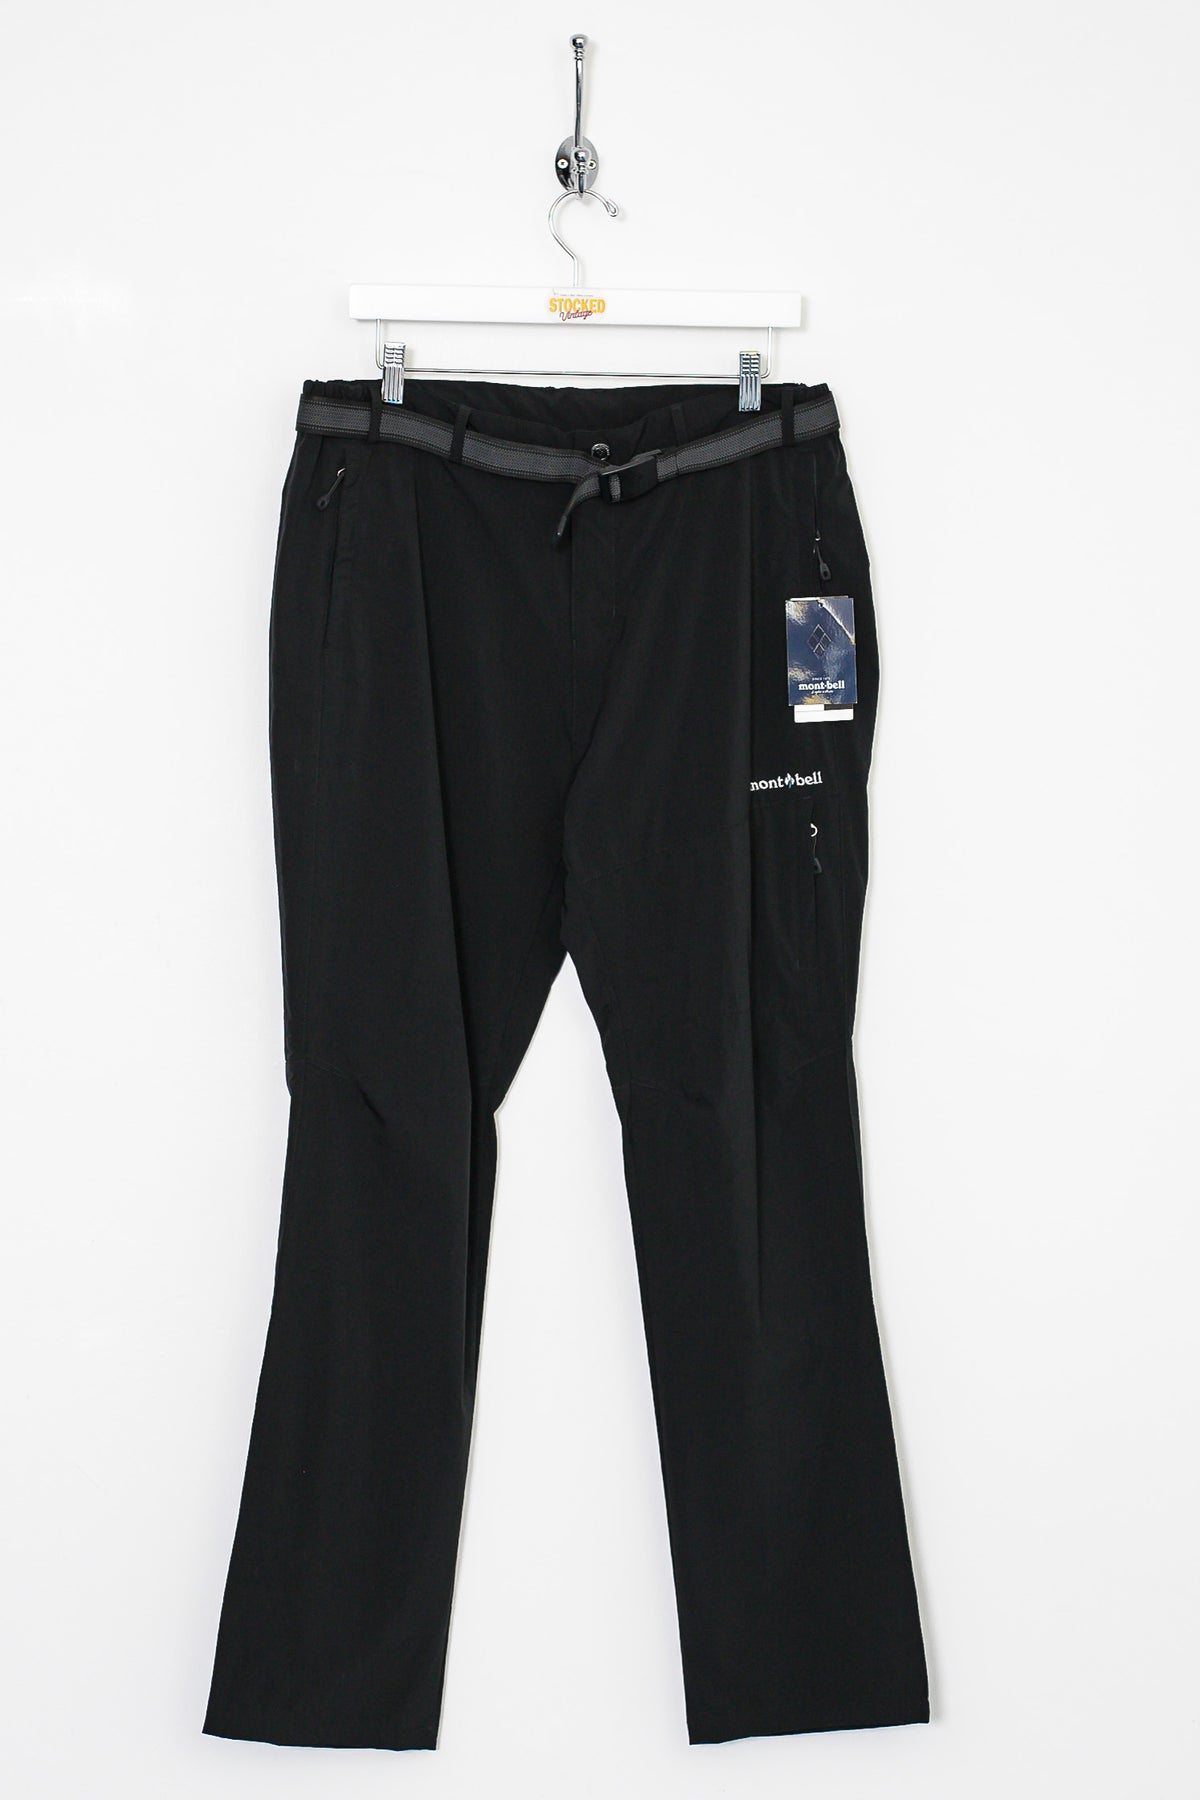 00s Mont Bell Trousers (L)